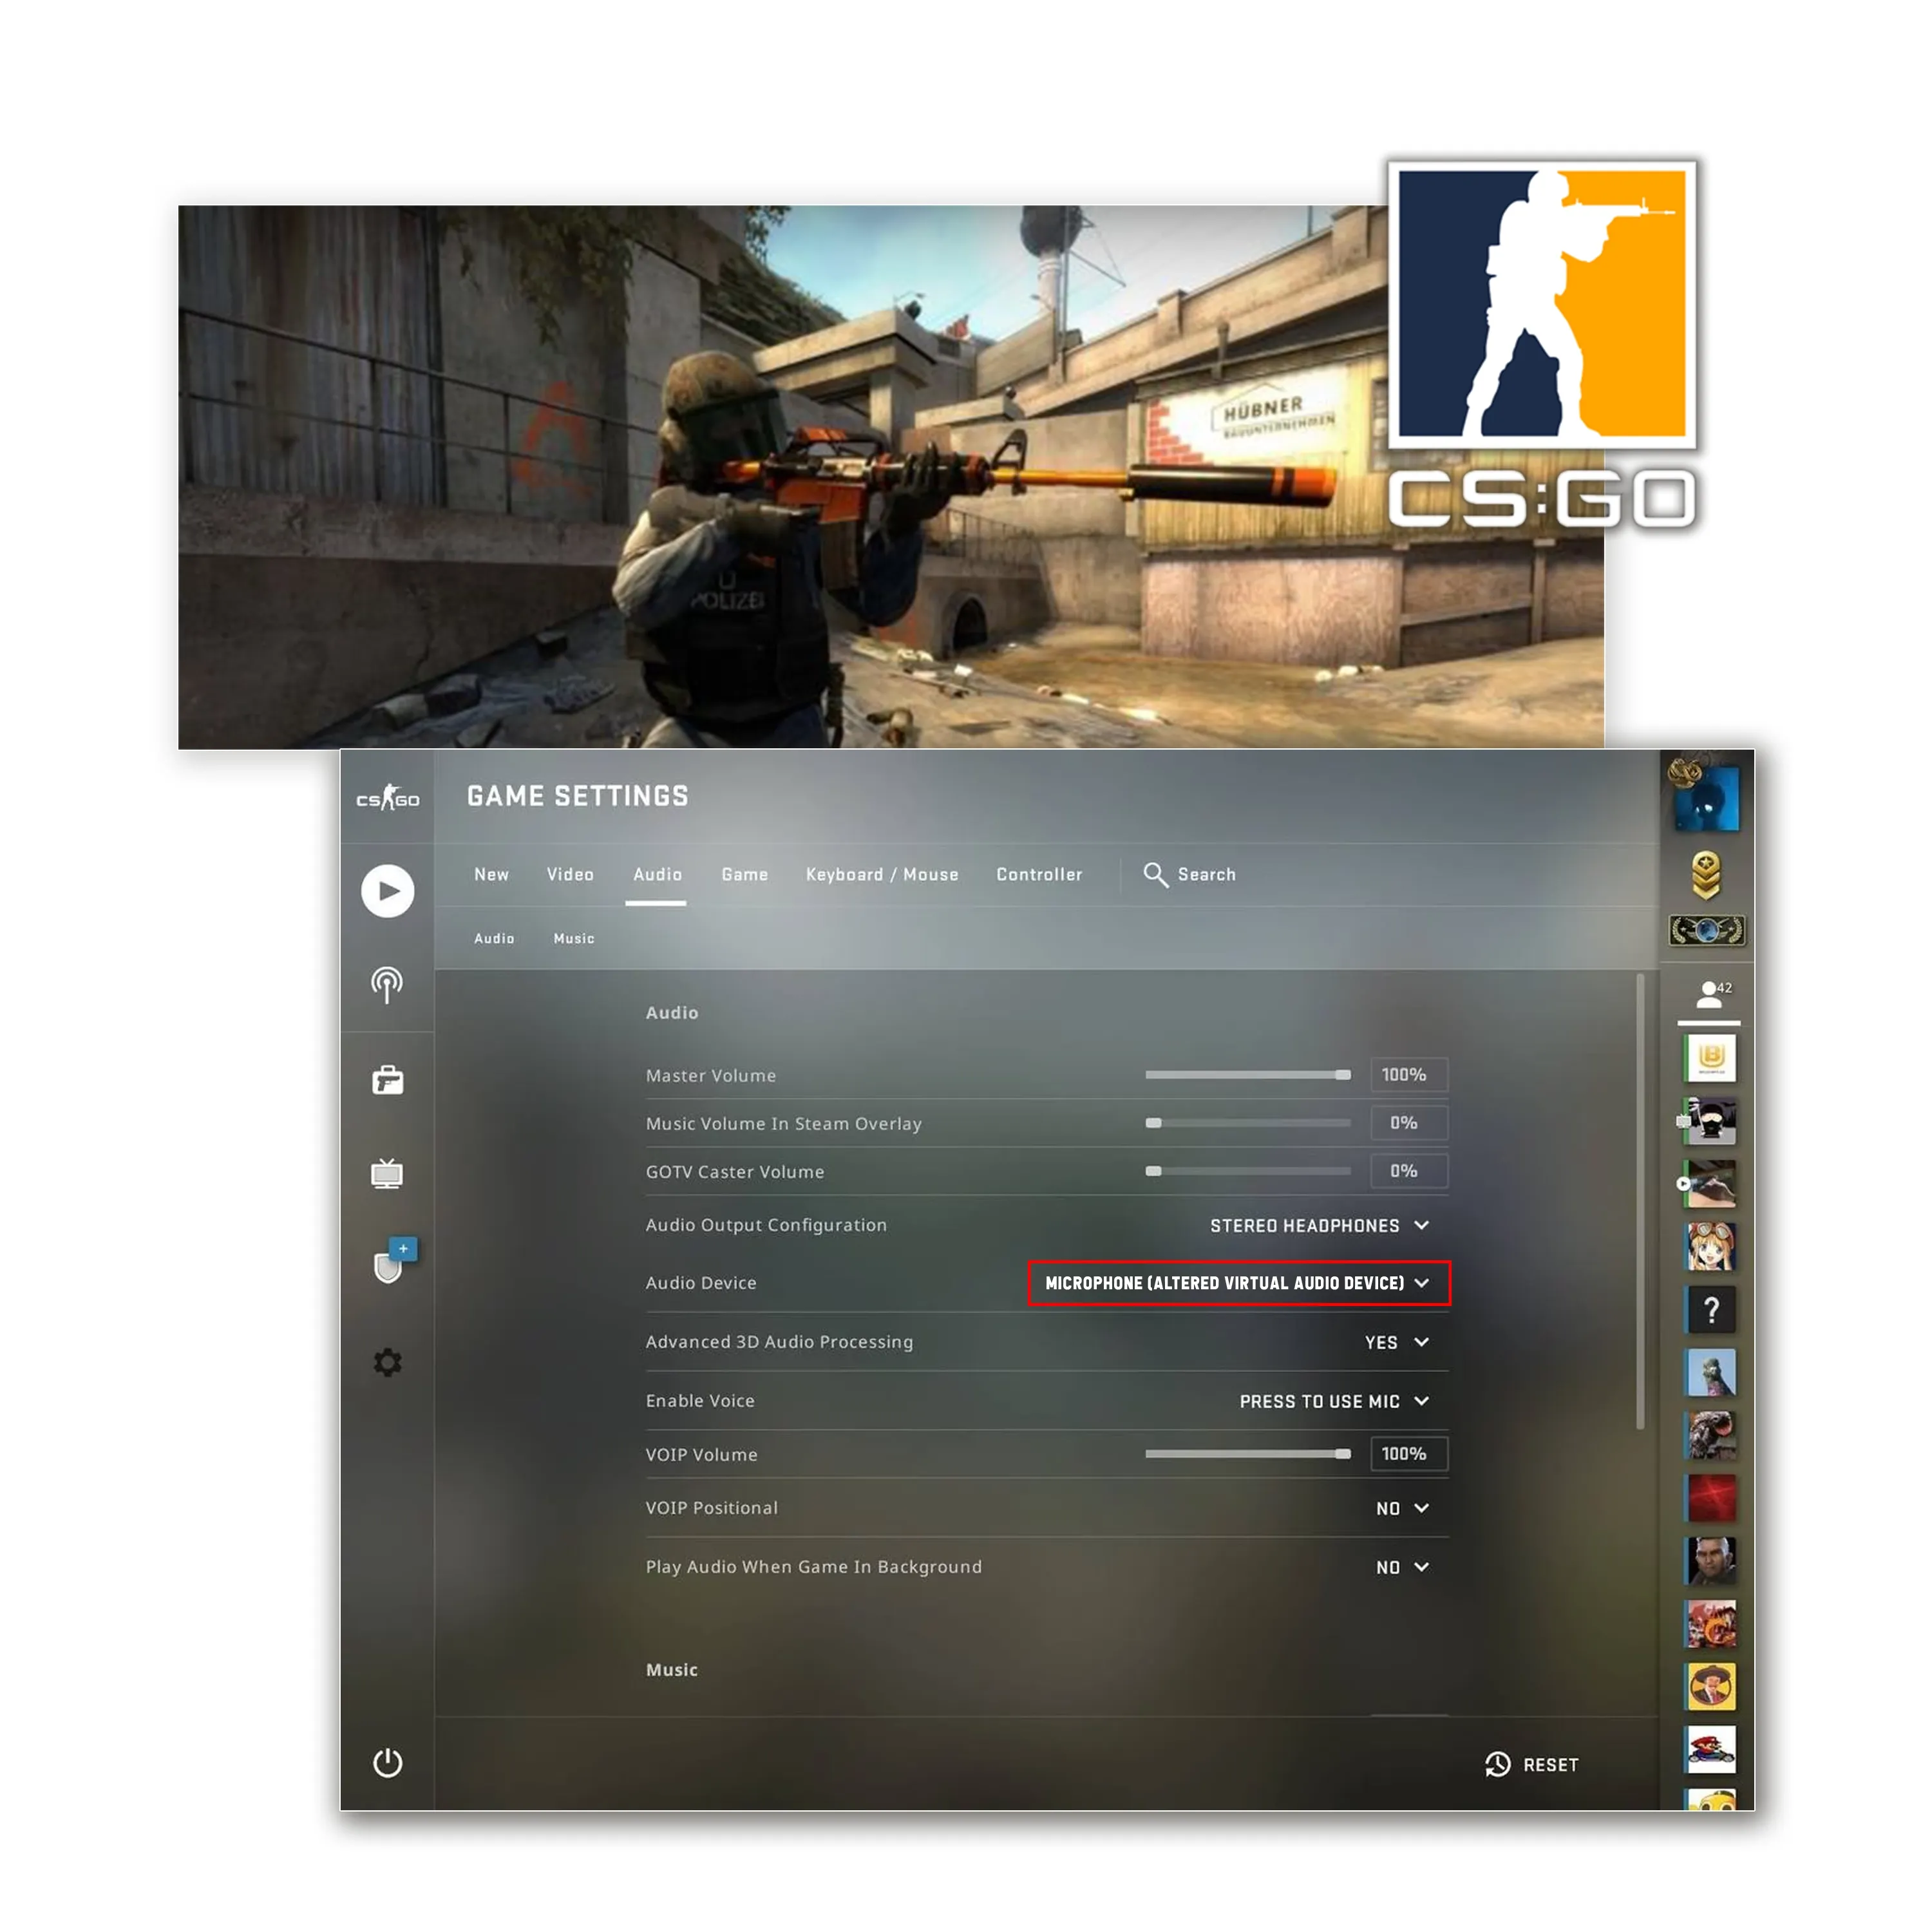 How to use Real-Time in CSGO